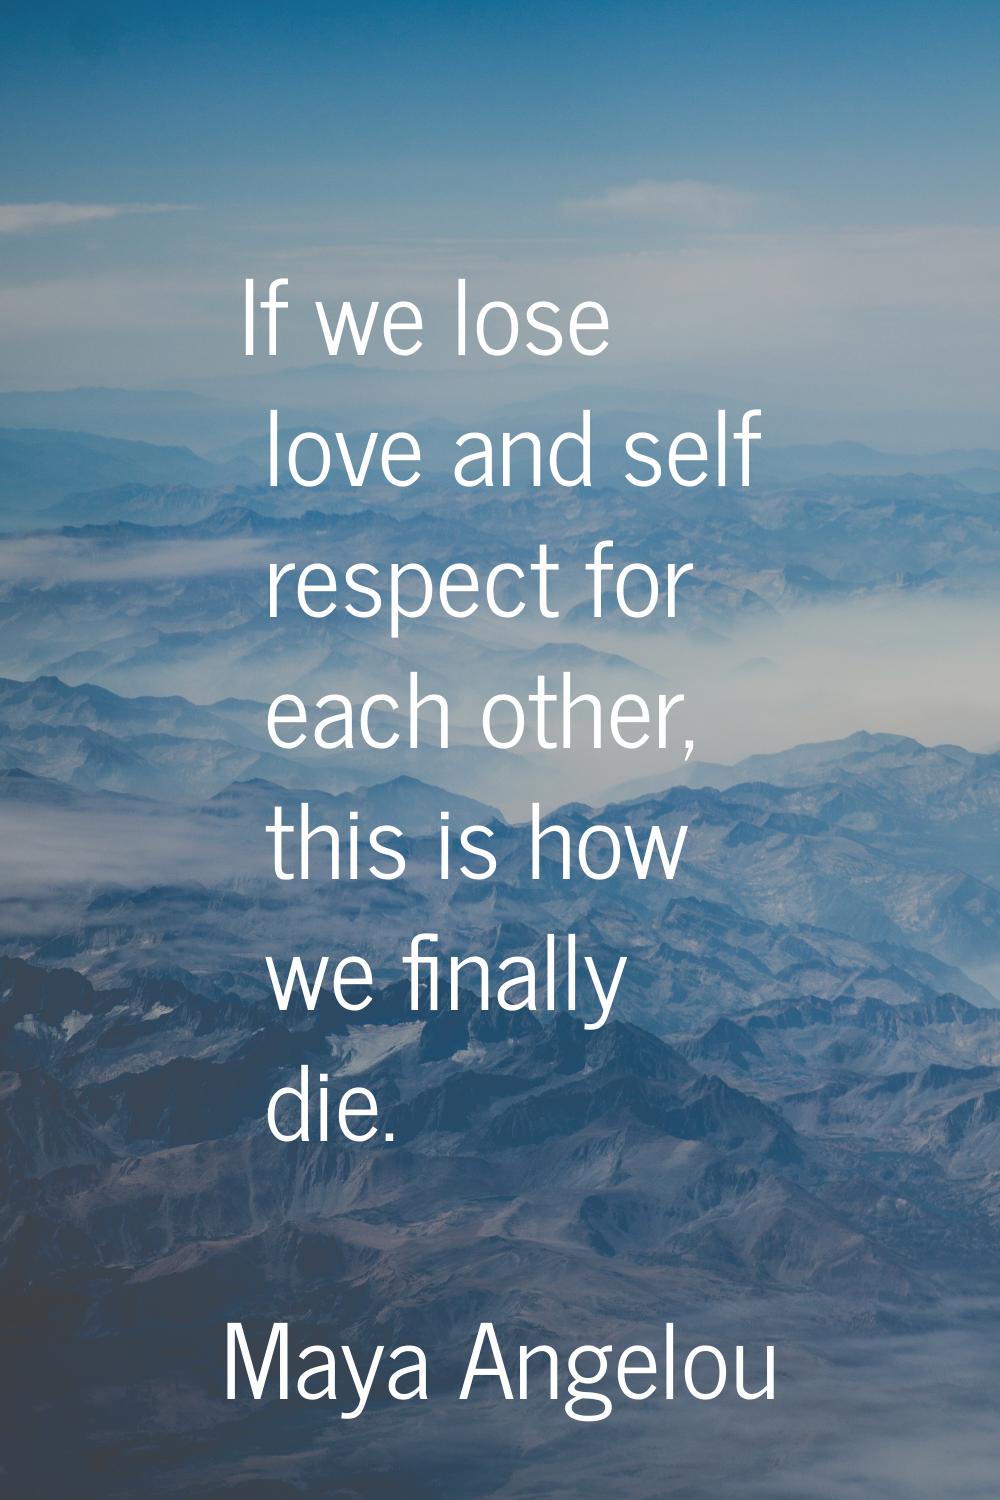 If we lose love and self respect for each other, this is how we finally die.